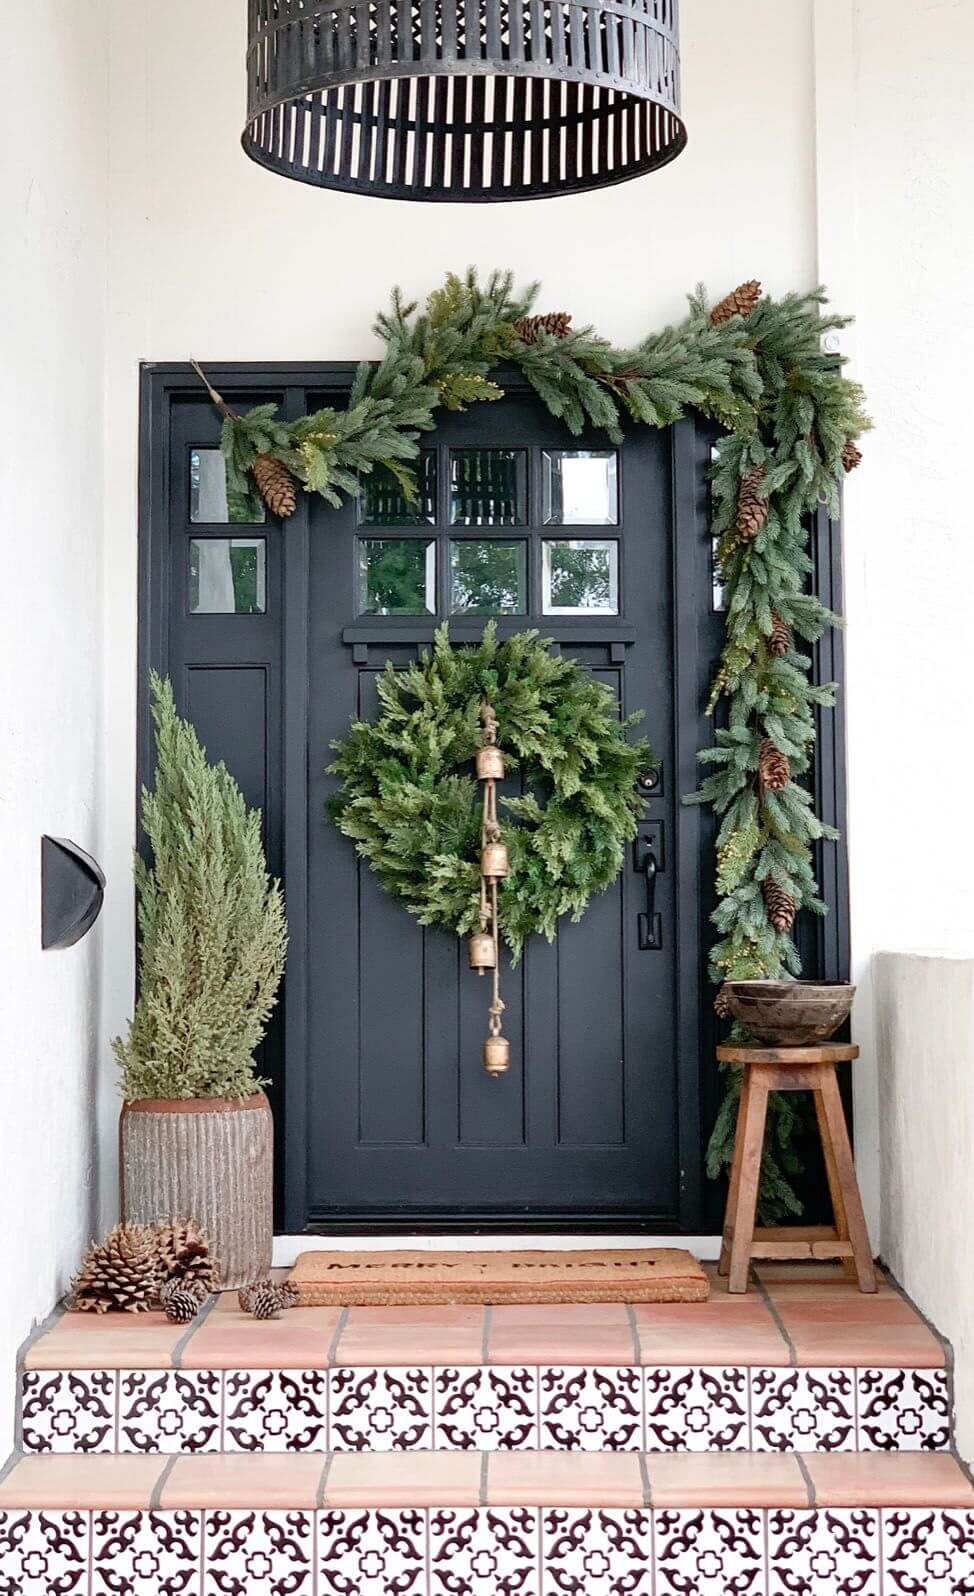 Beautify your front porch with 43 amazing winter decorating ideas - 331